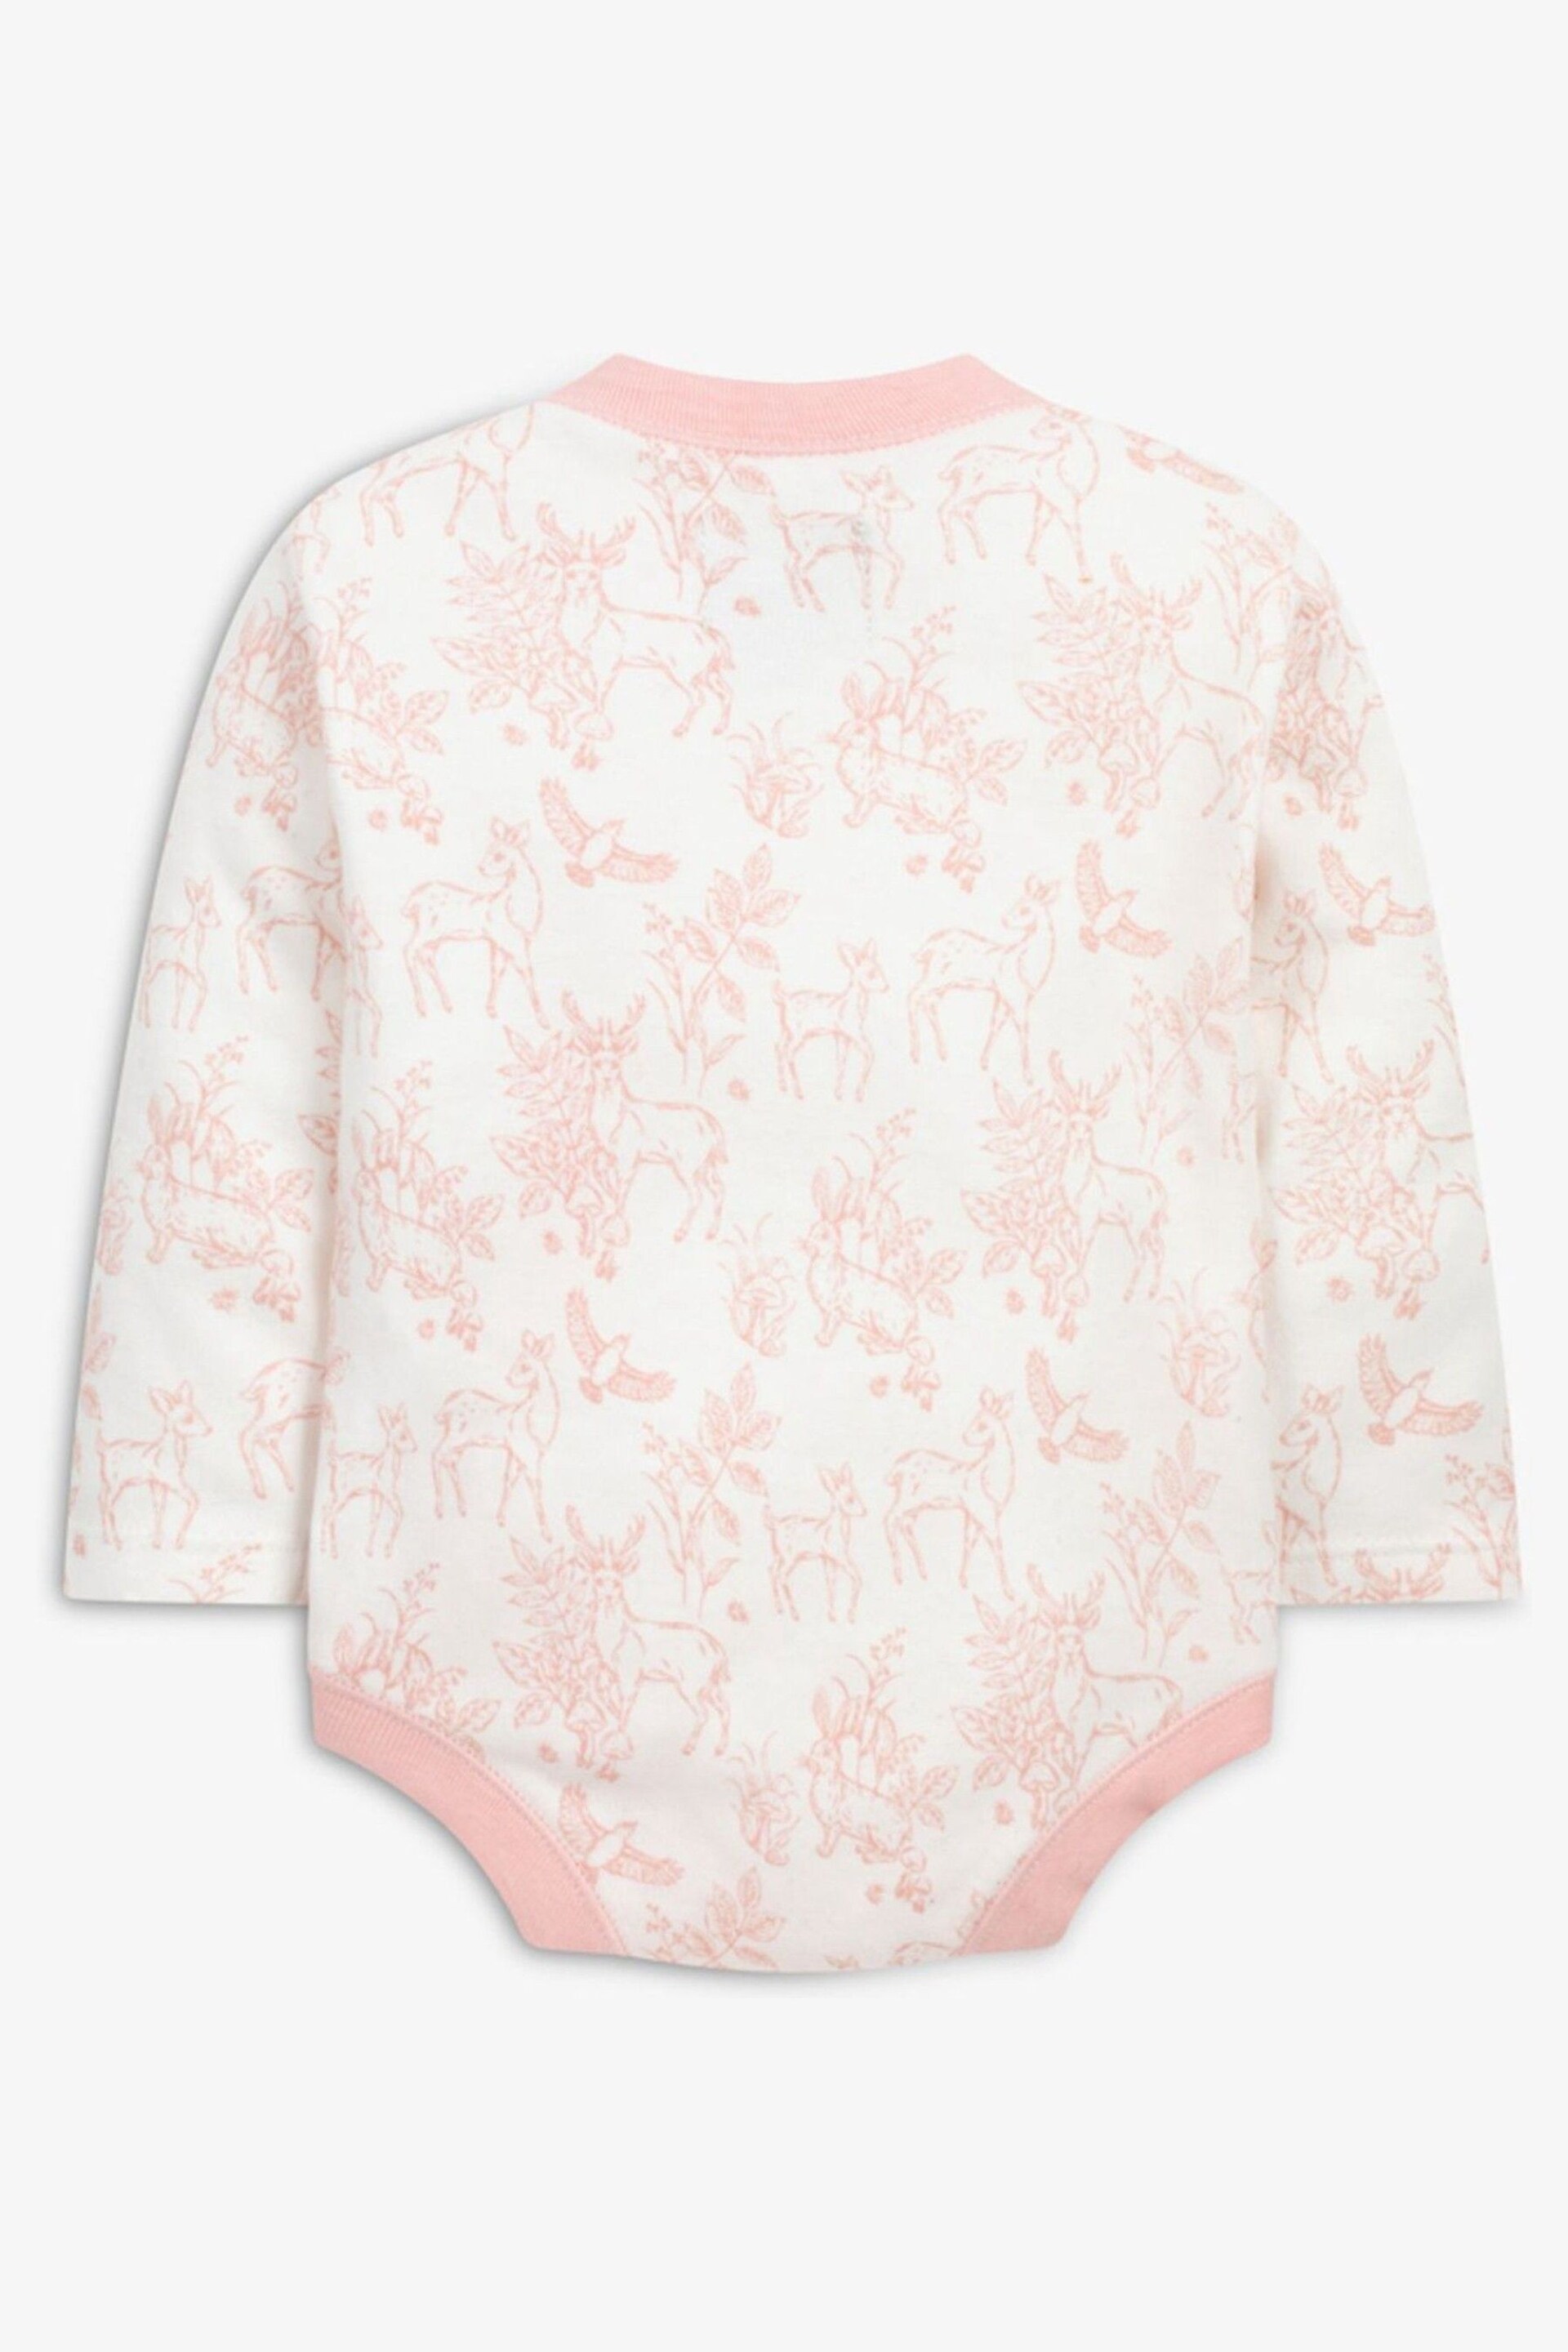 The Little Tailor Baby Easter Bunny Print Soft Cotton Bodysuit - Image 3 of 4